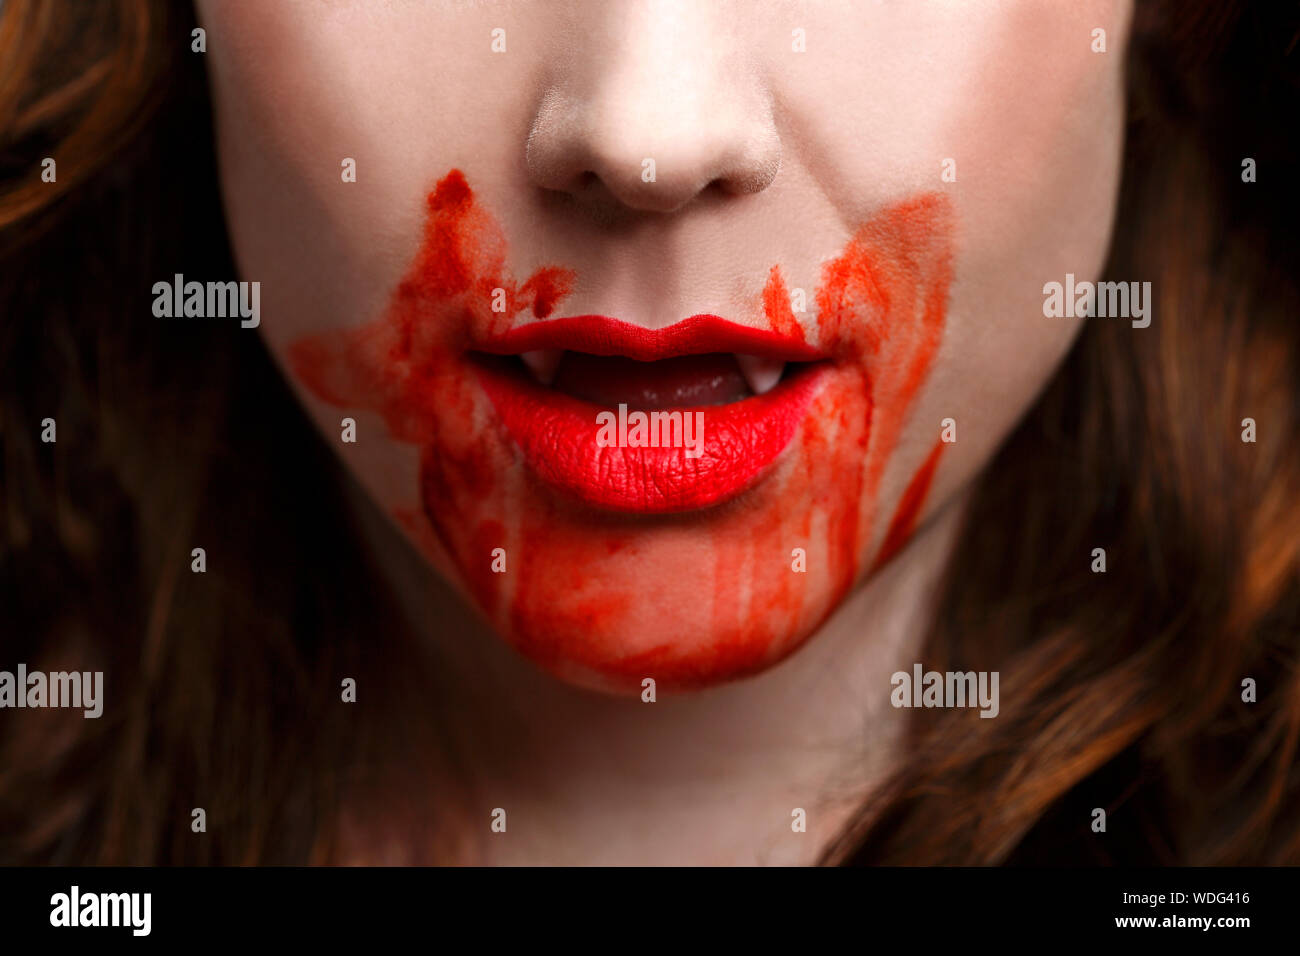 Close-up Of Woman With Blood On Mouth Stock Photo - Alamy